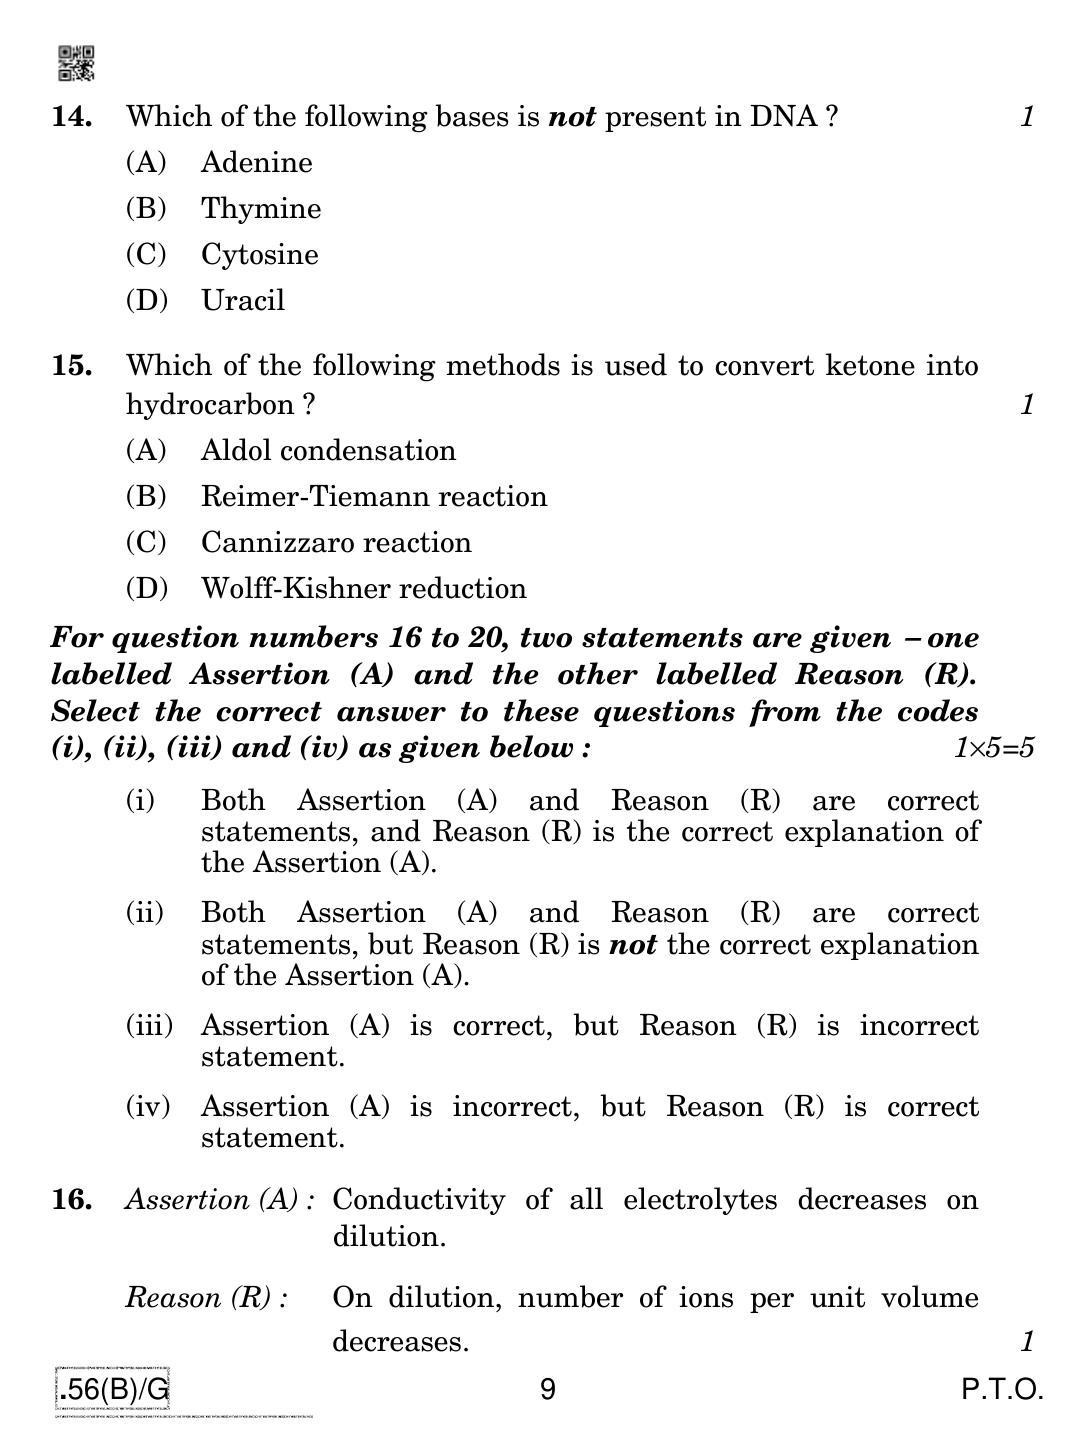 CBSE Class 12 56(B)-C - Chemistry For Blind Candidates 2020 Compartment Question Paper - Page 9